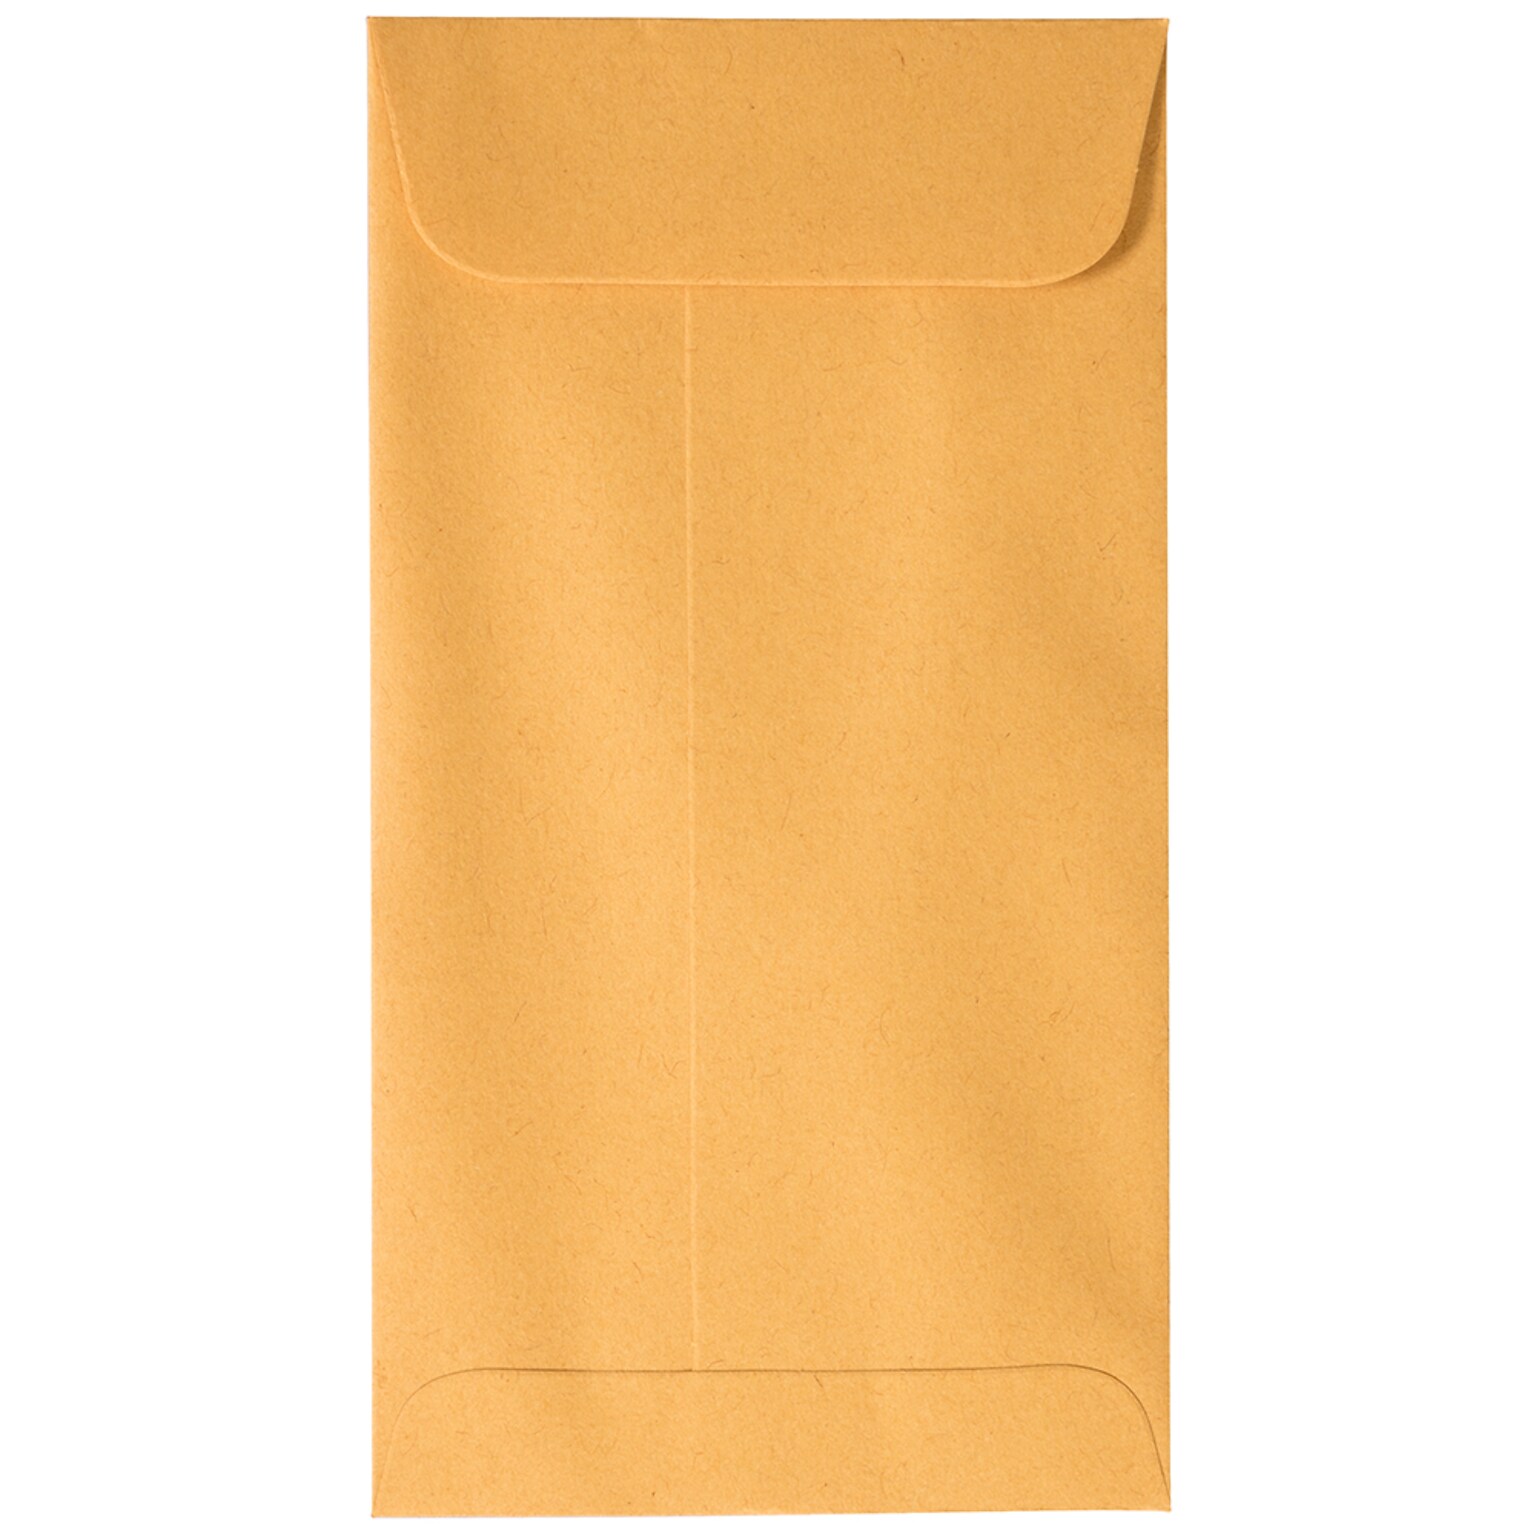 JAM Paper Business #7 Coin Envelopes with Peel & Seal Closure, 3 1/2 x 6 1/2, Brown Kraft Manila, 50/Pack (400238464I)